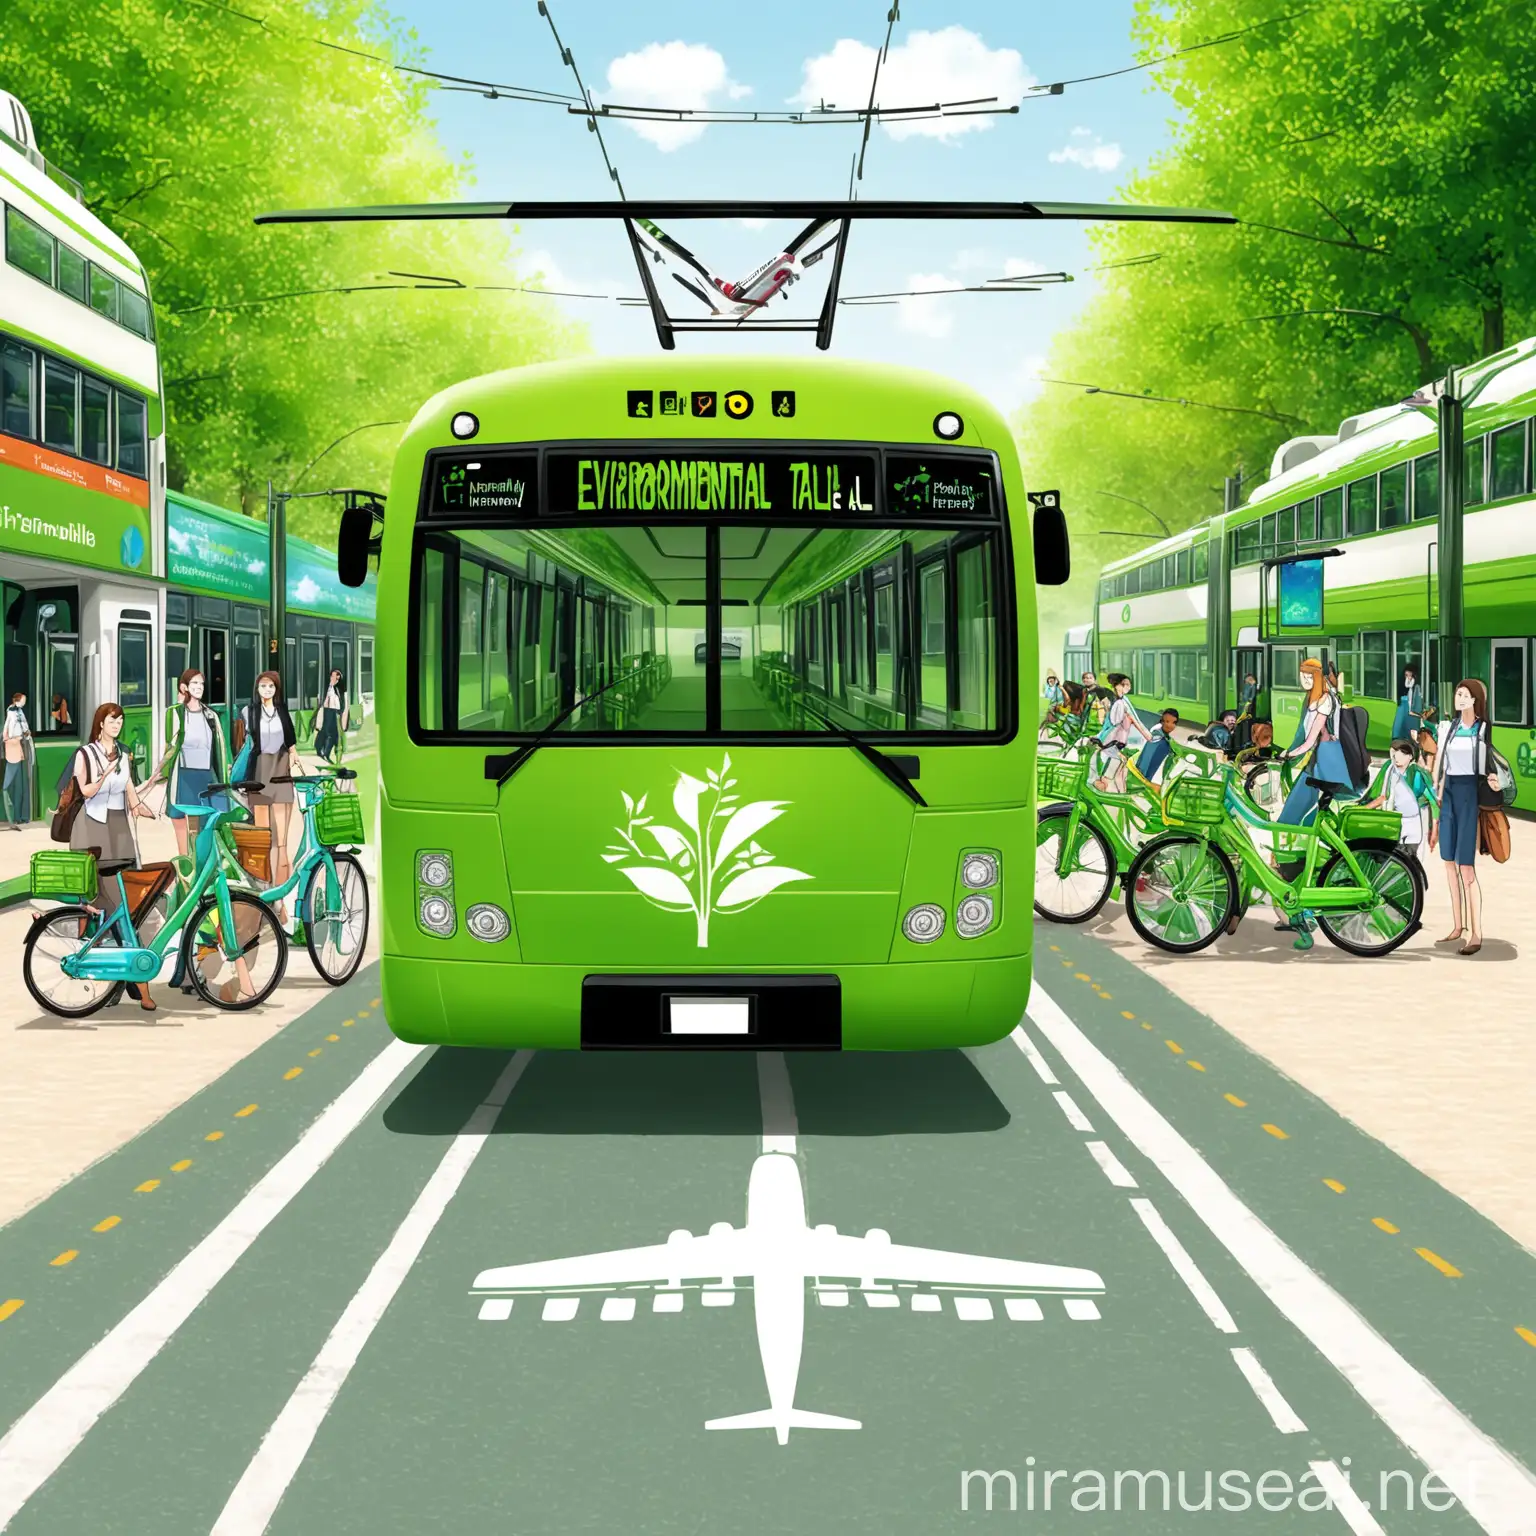 environemntal sustainable all transportation and mobility modes
-environmental friendly airplane
-environmental friendly Bus
-environmental friendly Train
--environmental friendly bikes
-environmental friendly street